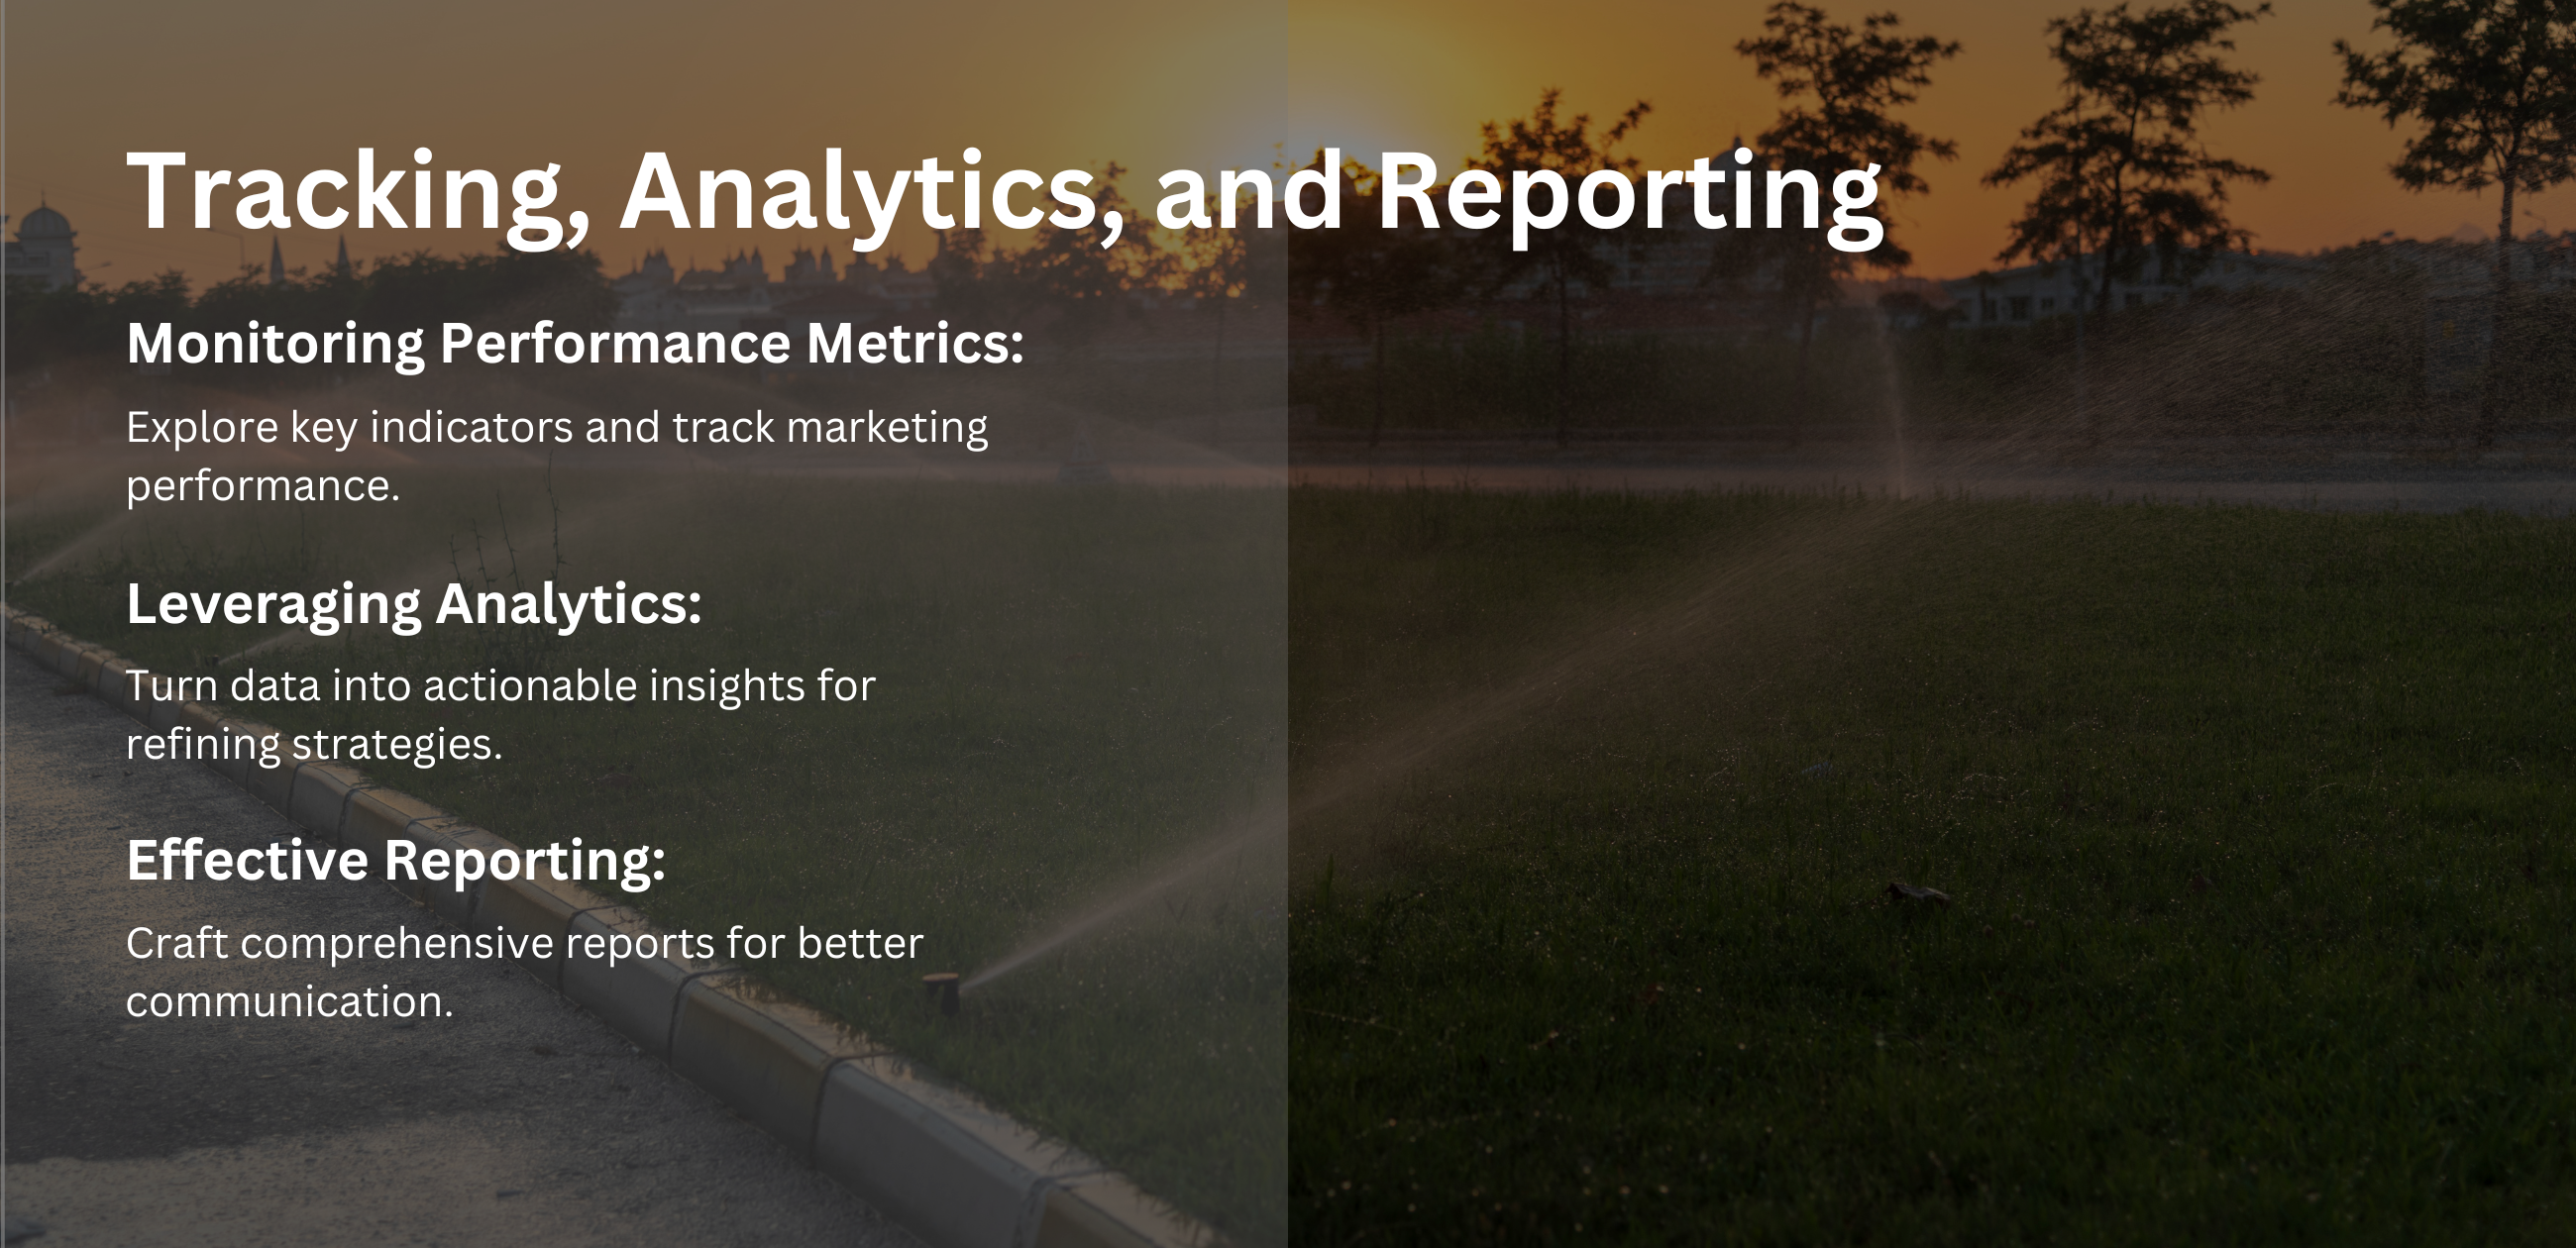 Tracking, Analytics, and Reporting